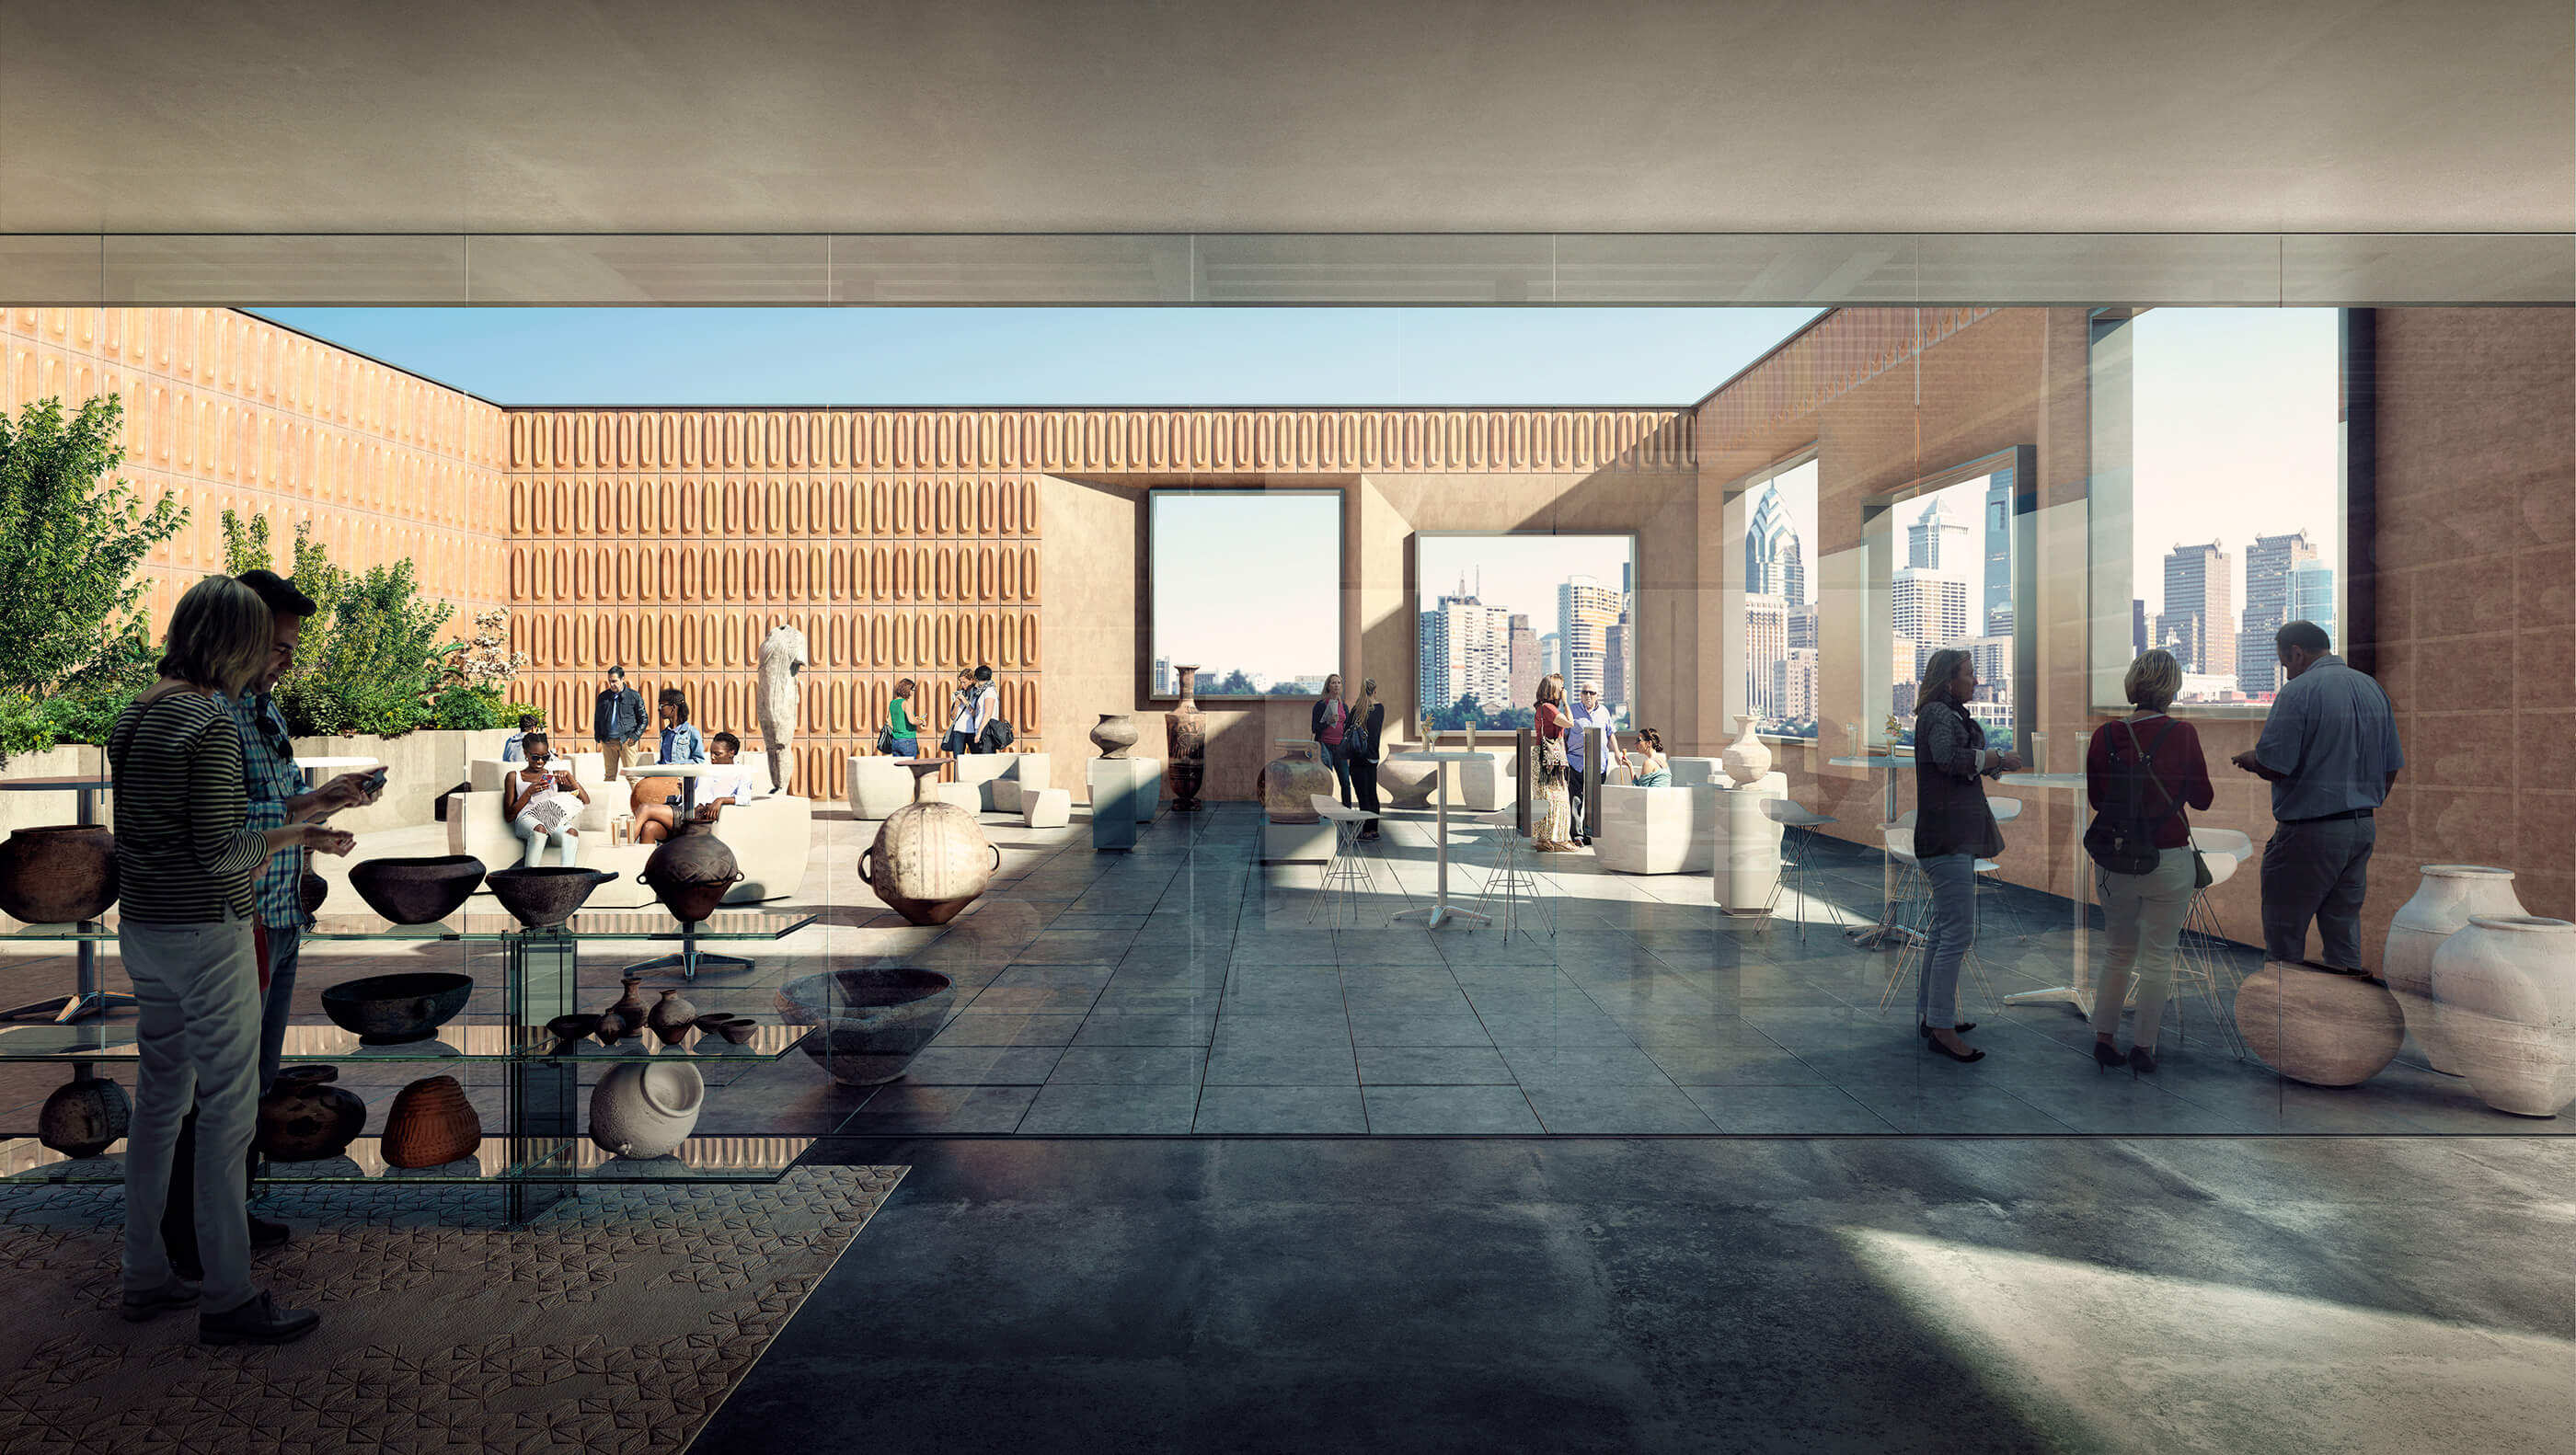 Exterior rooftop rendering of a ceramics gallery space